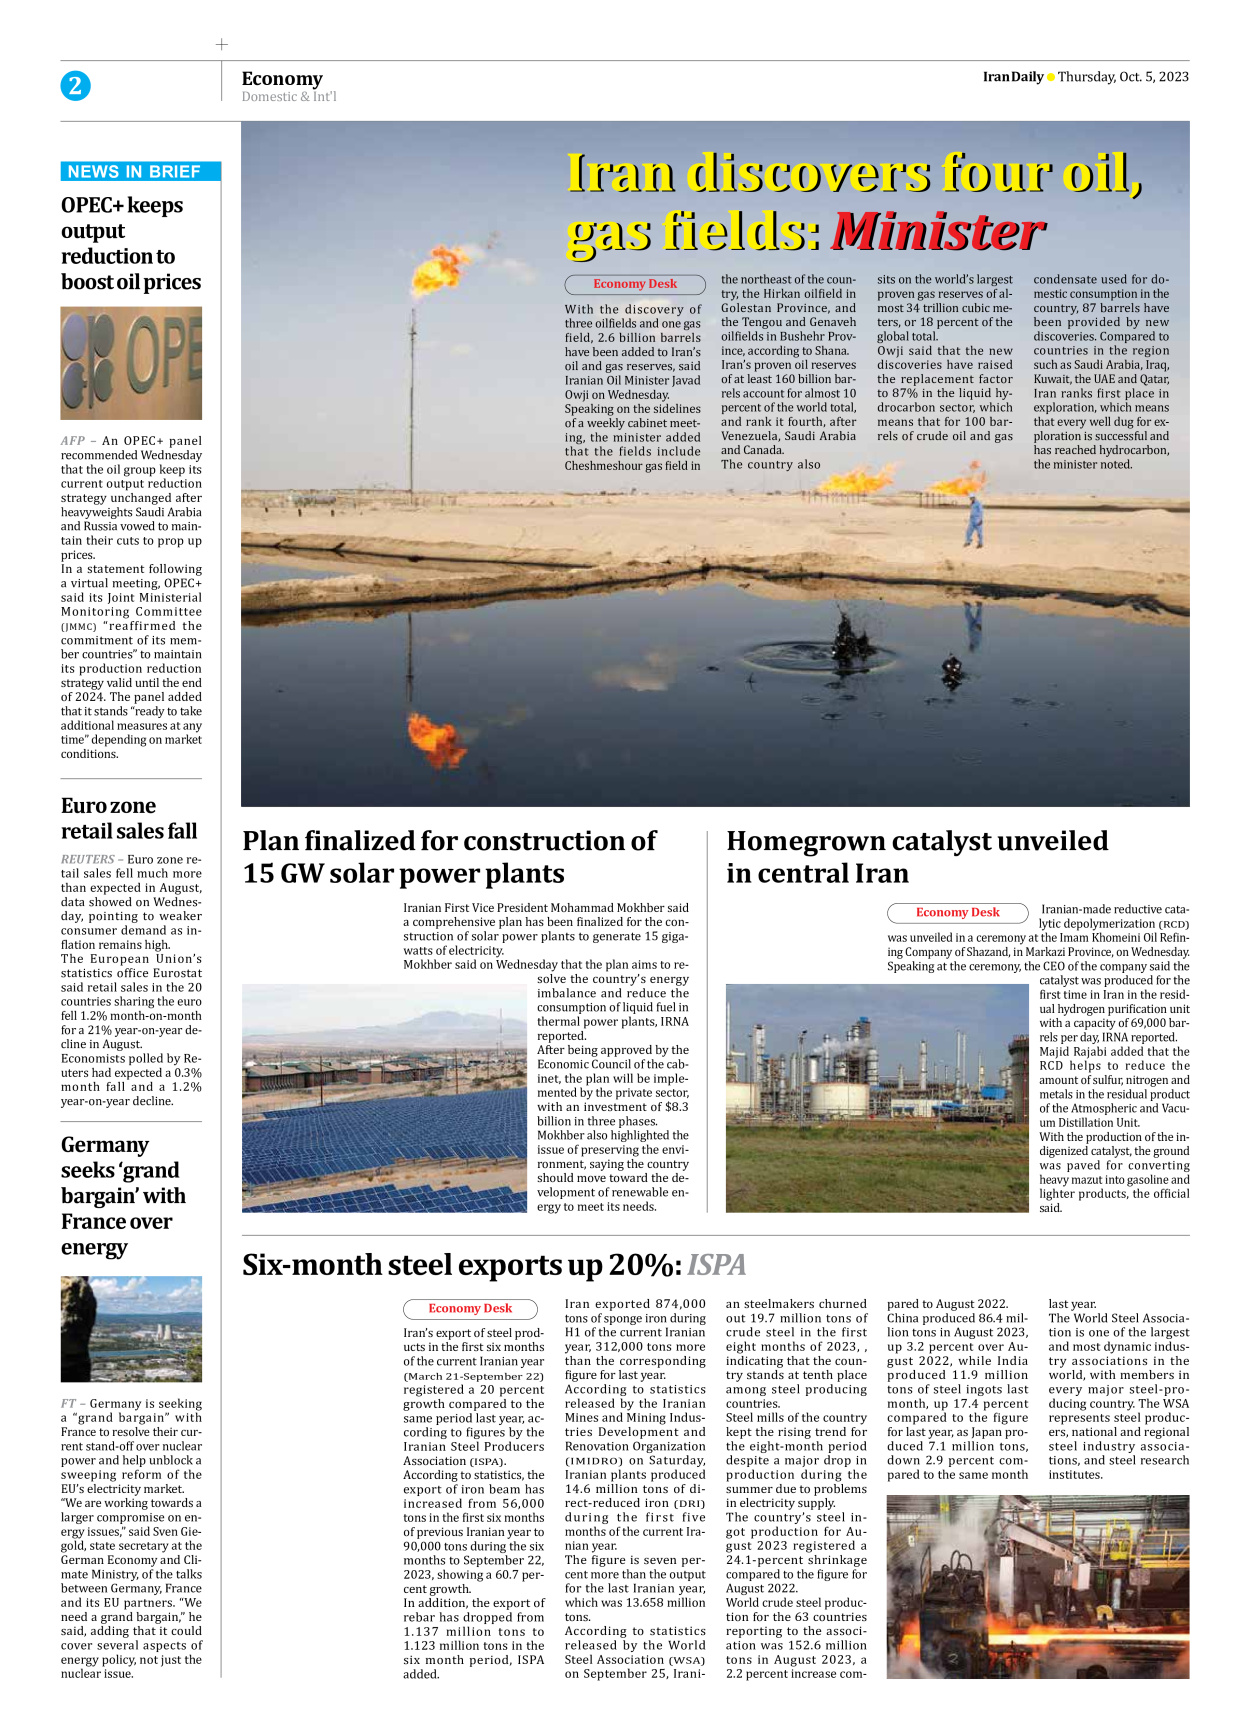 Iran Daily - Number Seven Thousand Four Hundred - 05 October 2023 - Page 2